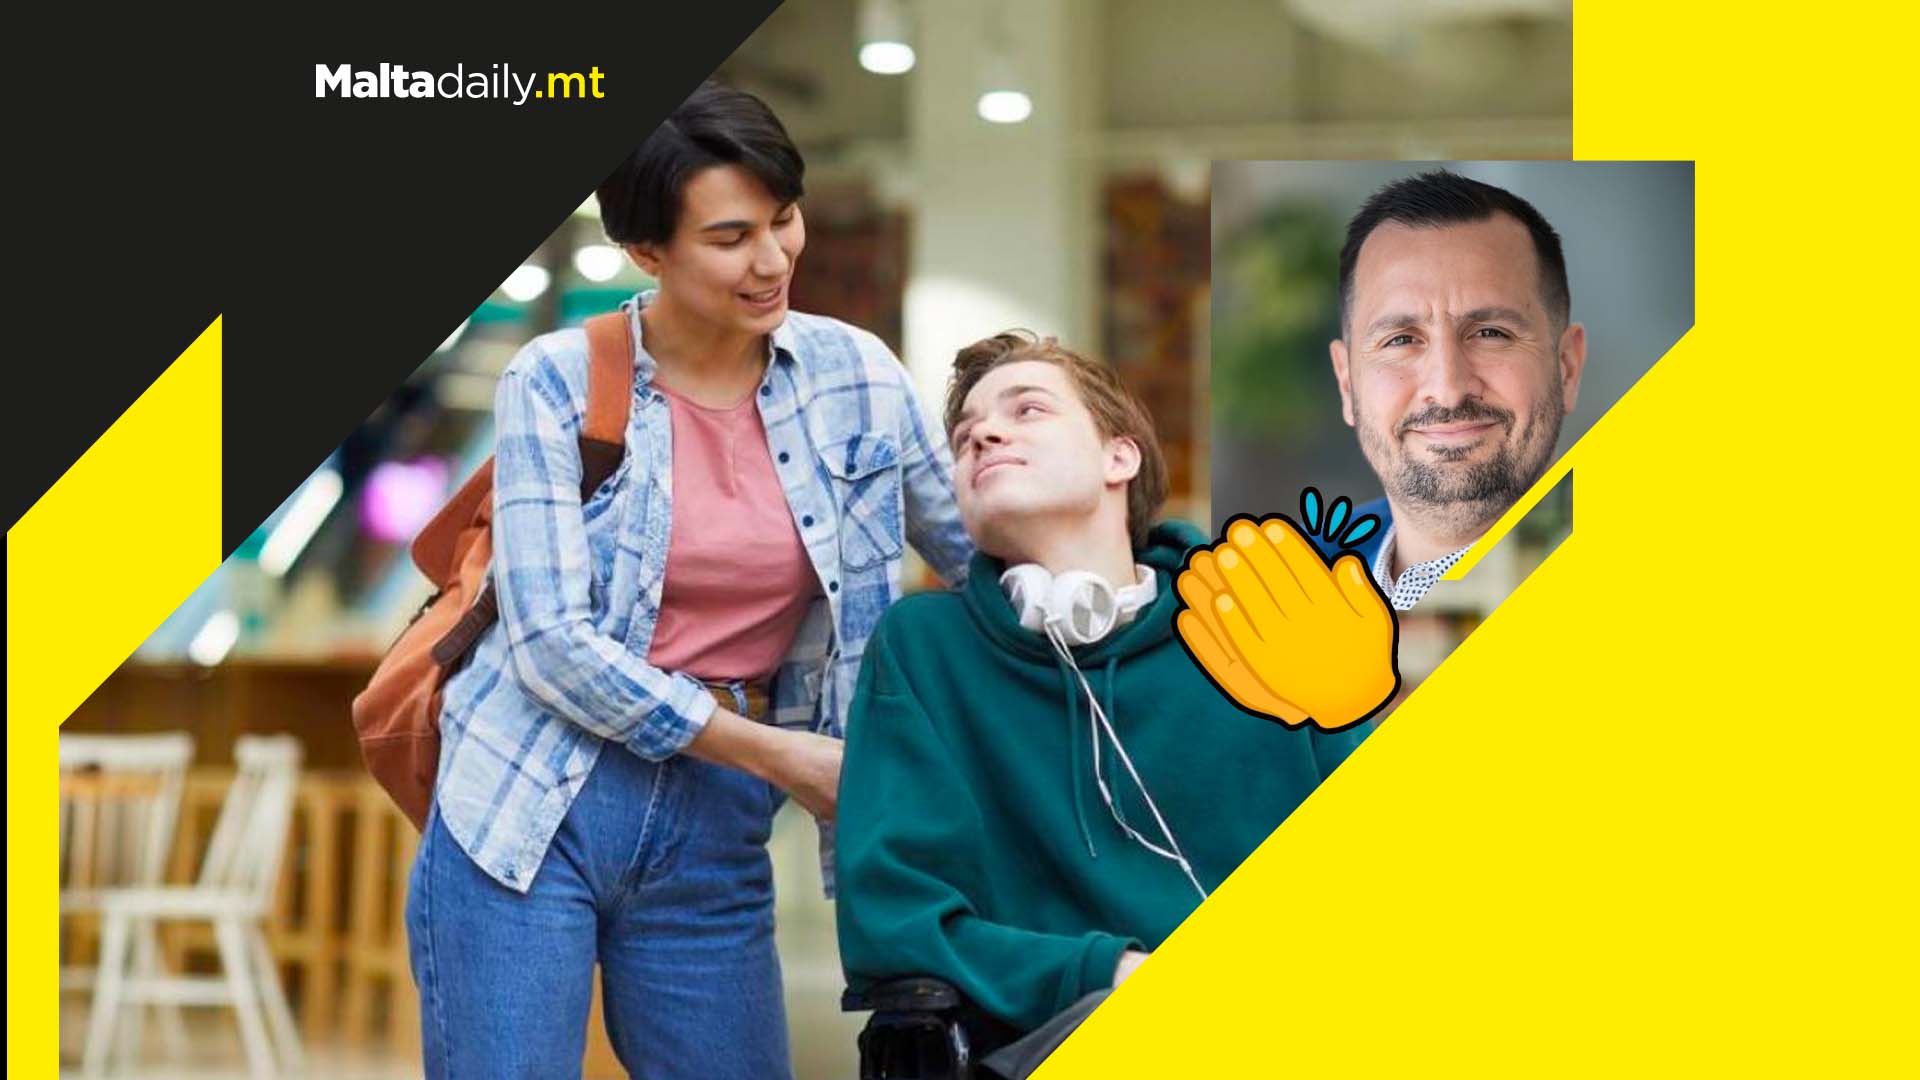 Persons with disabilities could get personal assistant to support independence